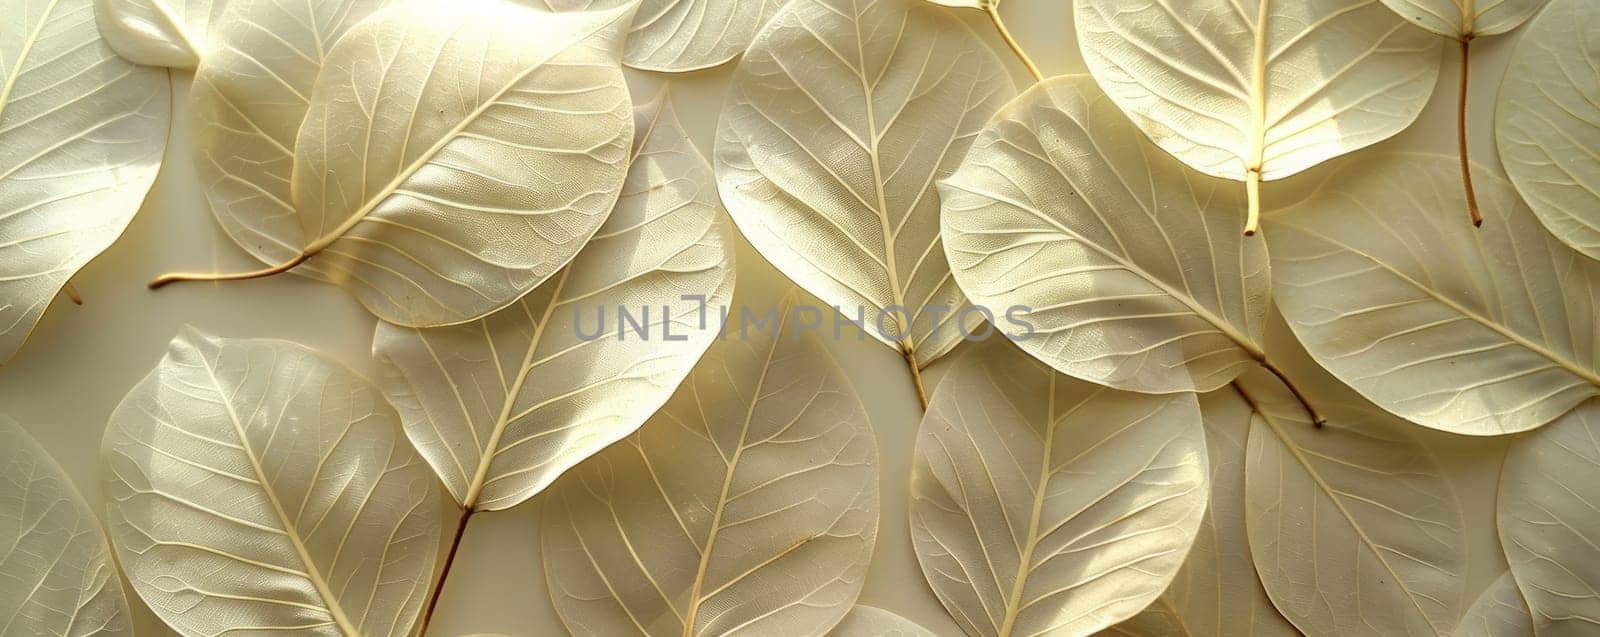 Closeup of Monstera leafs background suitable for wallpaper or to represent as backdrop or mockup. by yom98